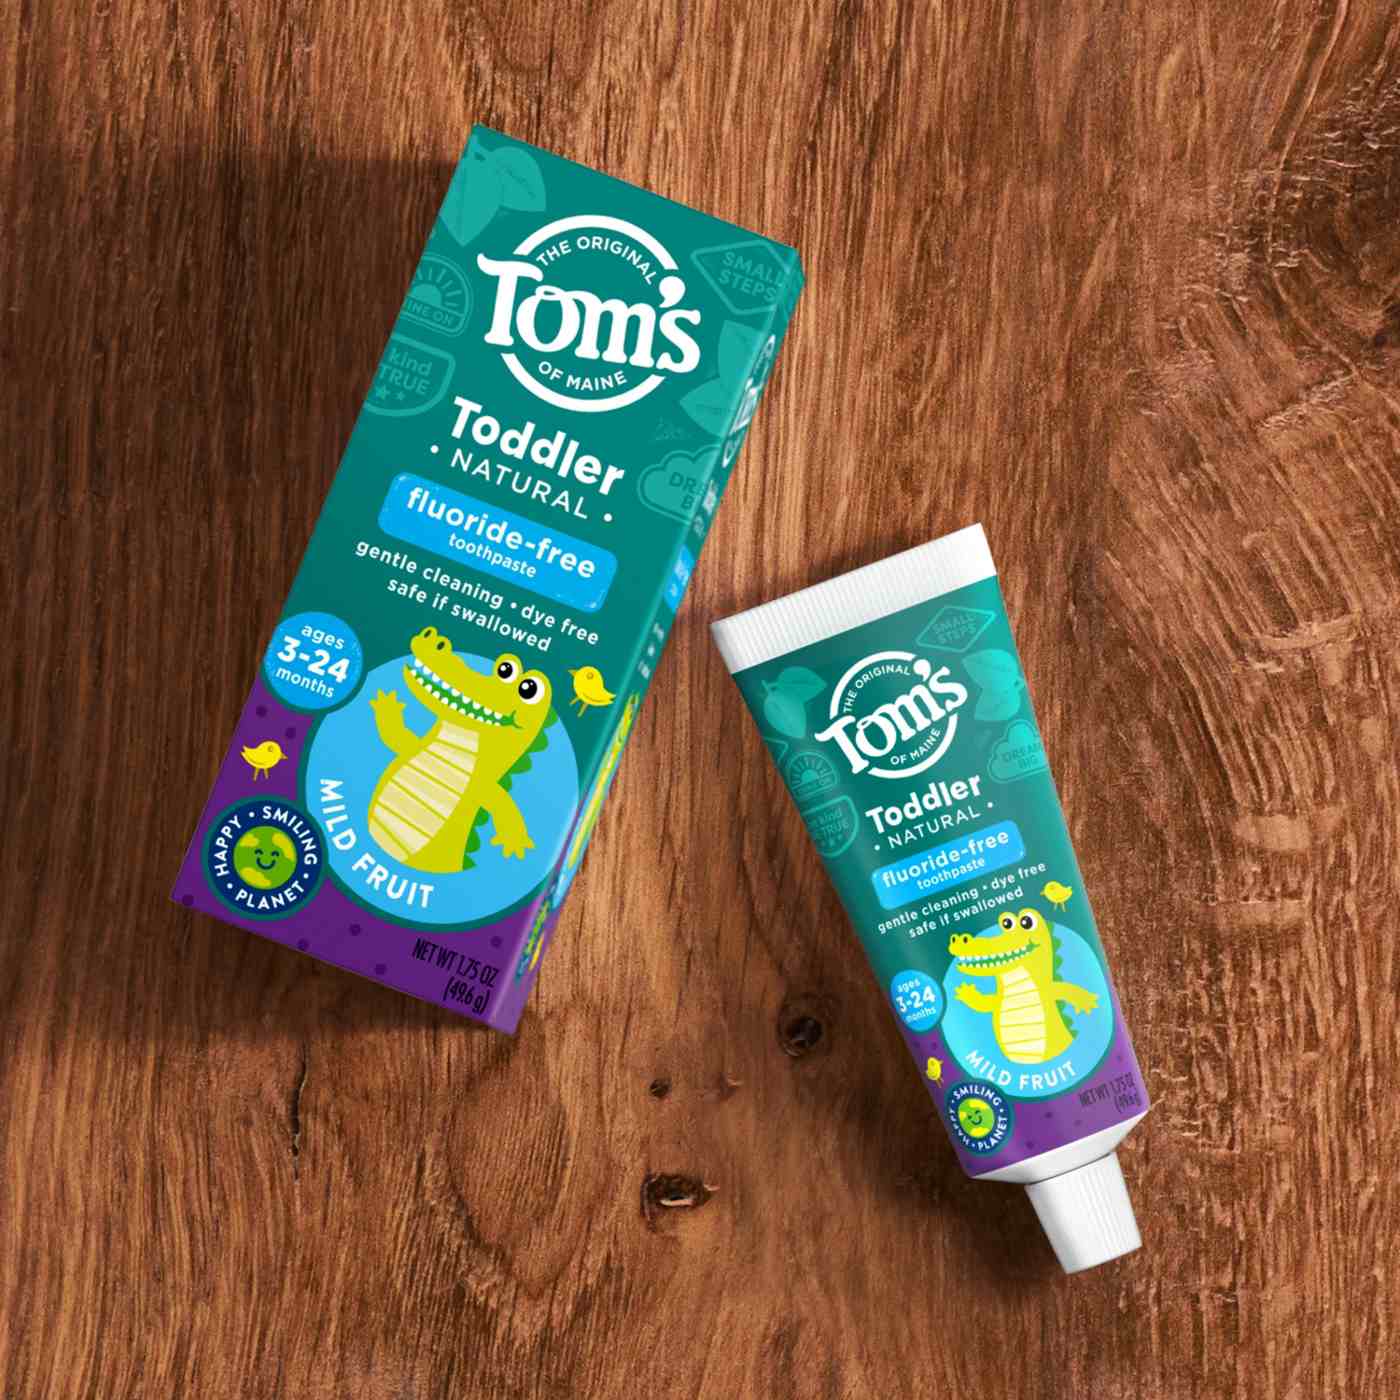 Tom's of Maine Toddler Fluoride - Free Training Toothpaste; image 3 of 8